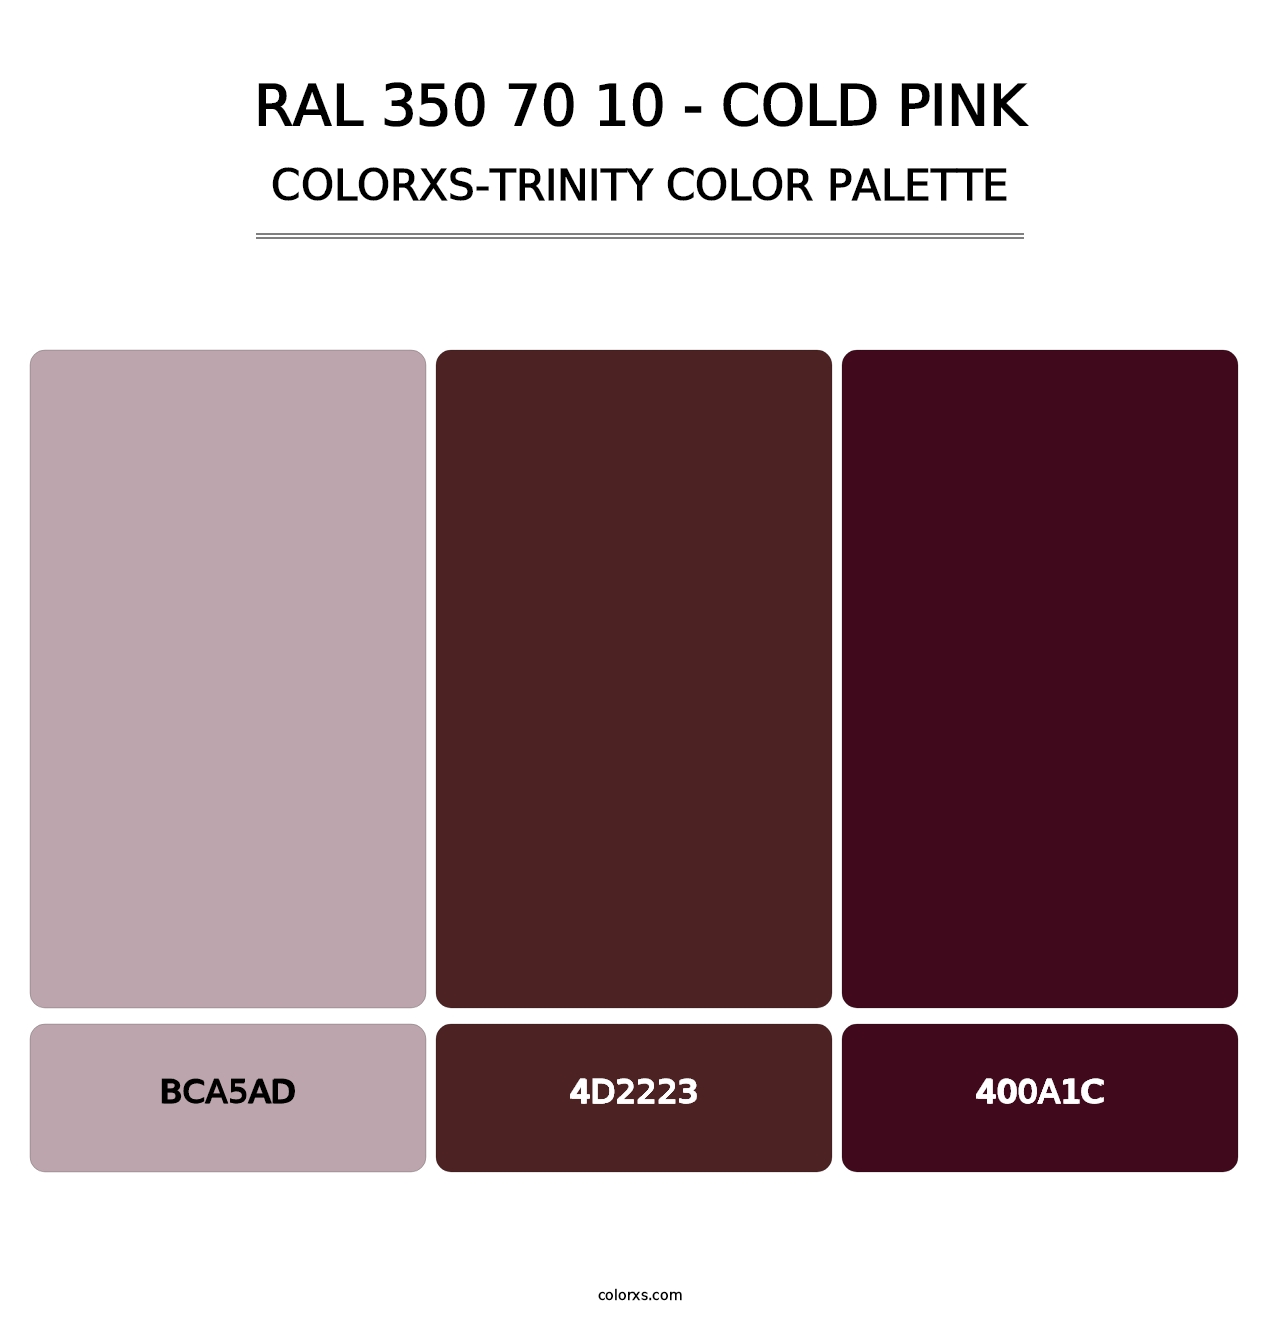 RAL 350 70 10 - Cold Pink - Colorxs Trinity Palette